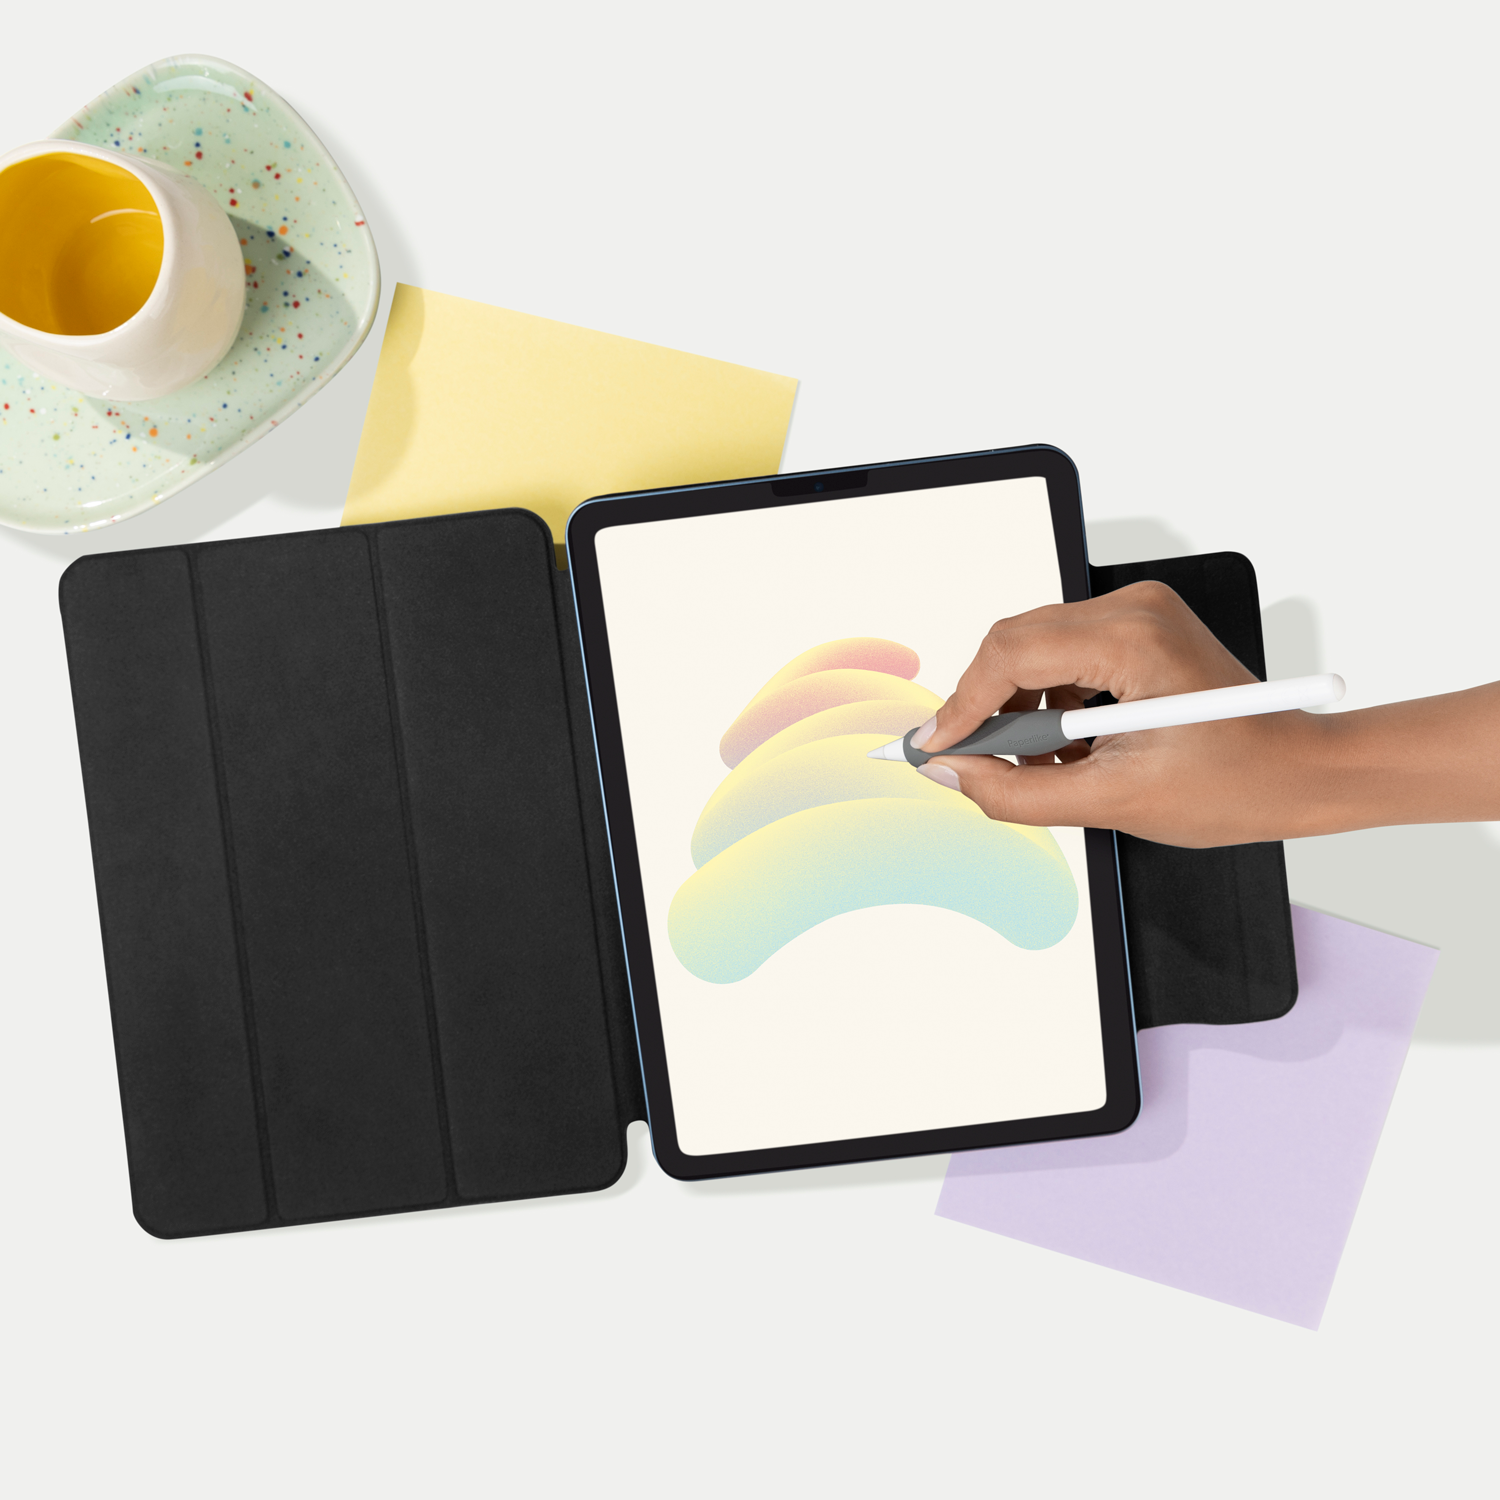 Protect your iPad with Paperlike's Folio case that feels like your favorite notebook